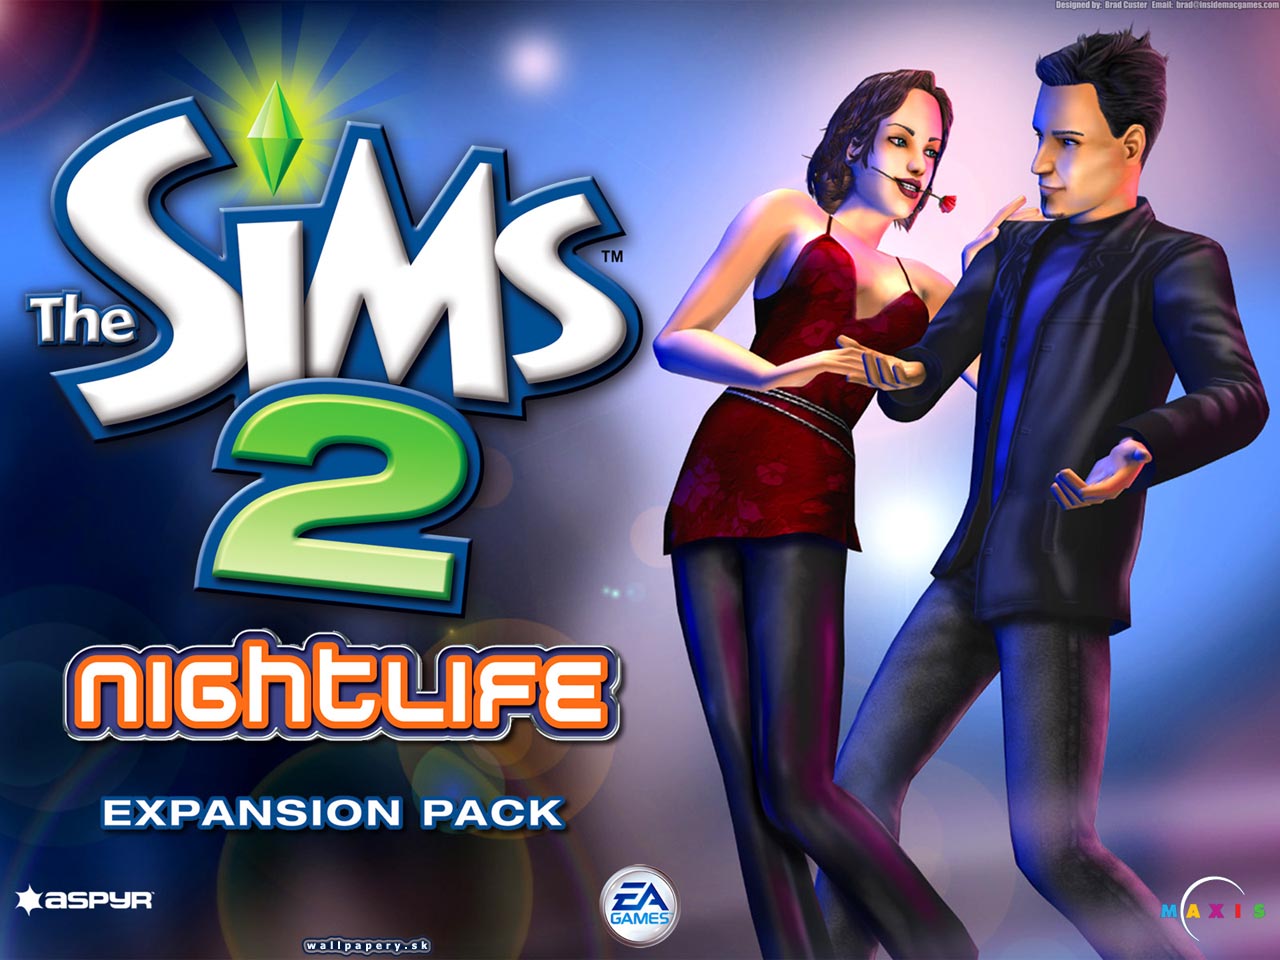 The Sims 2: Nightlife - wallpaper 8